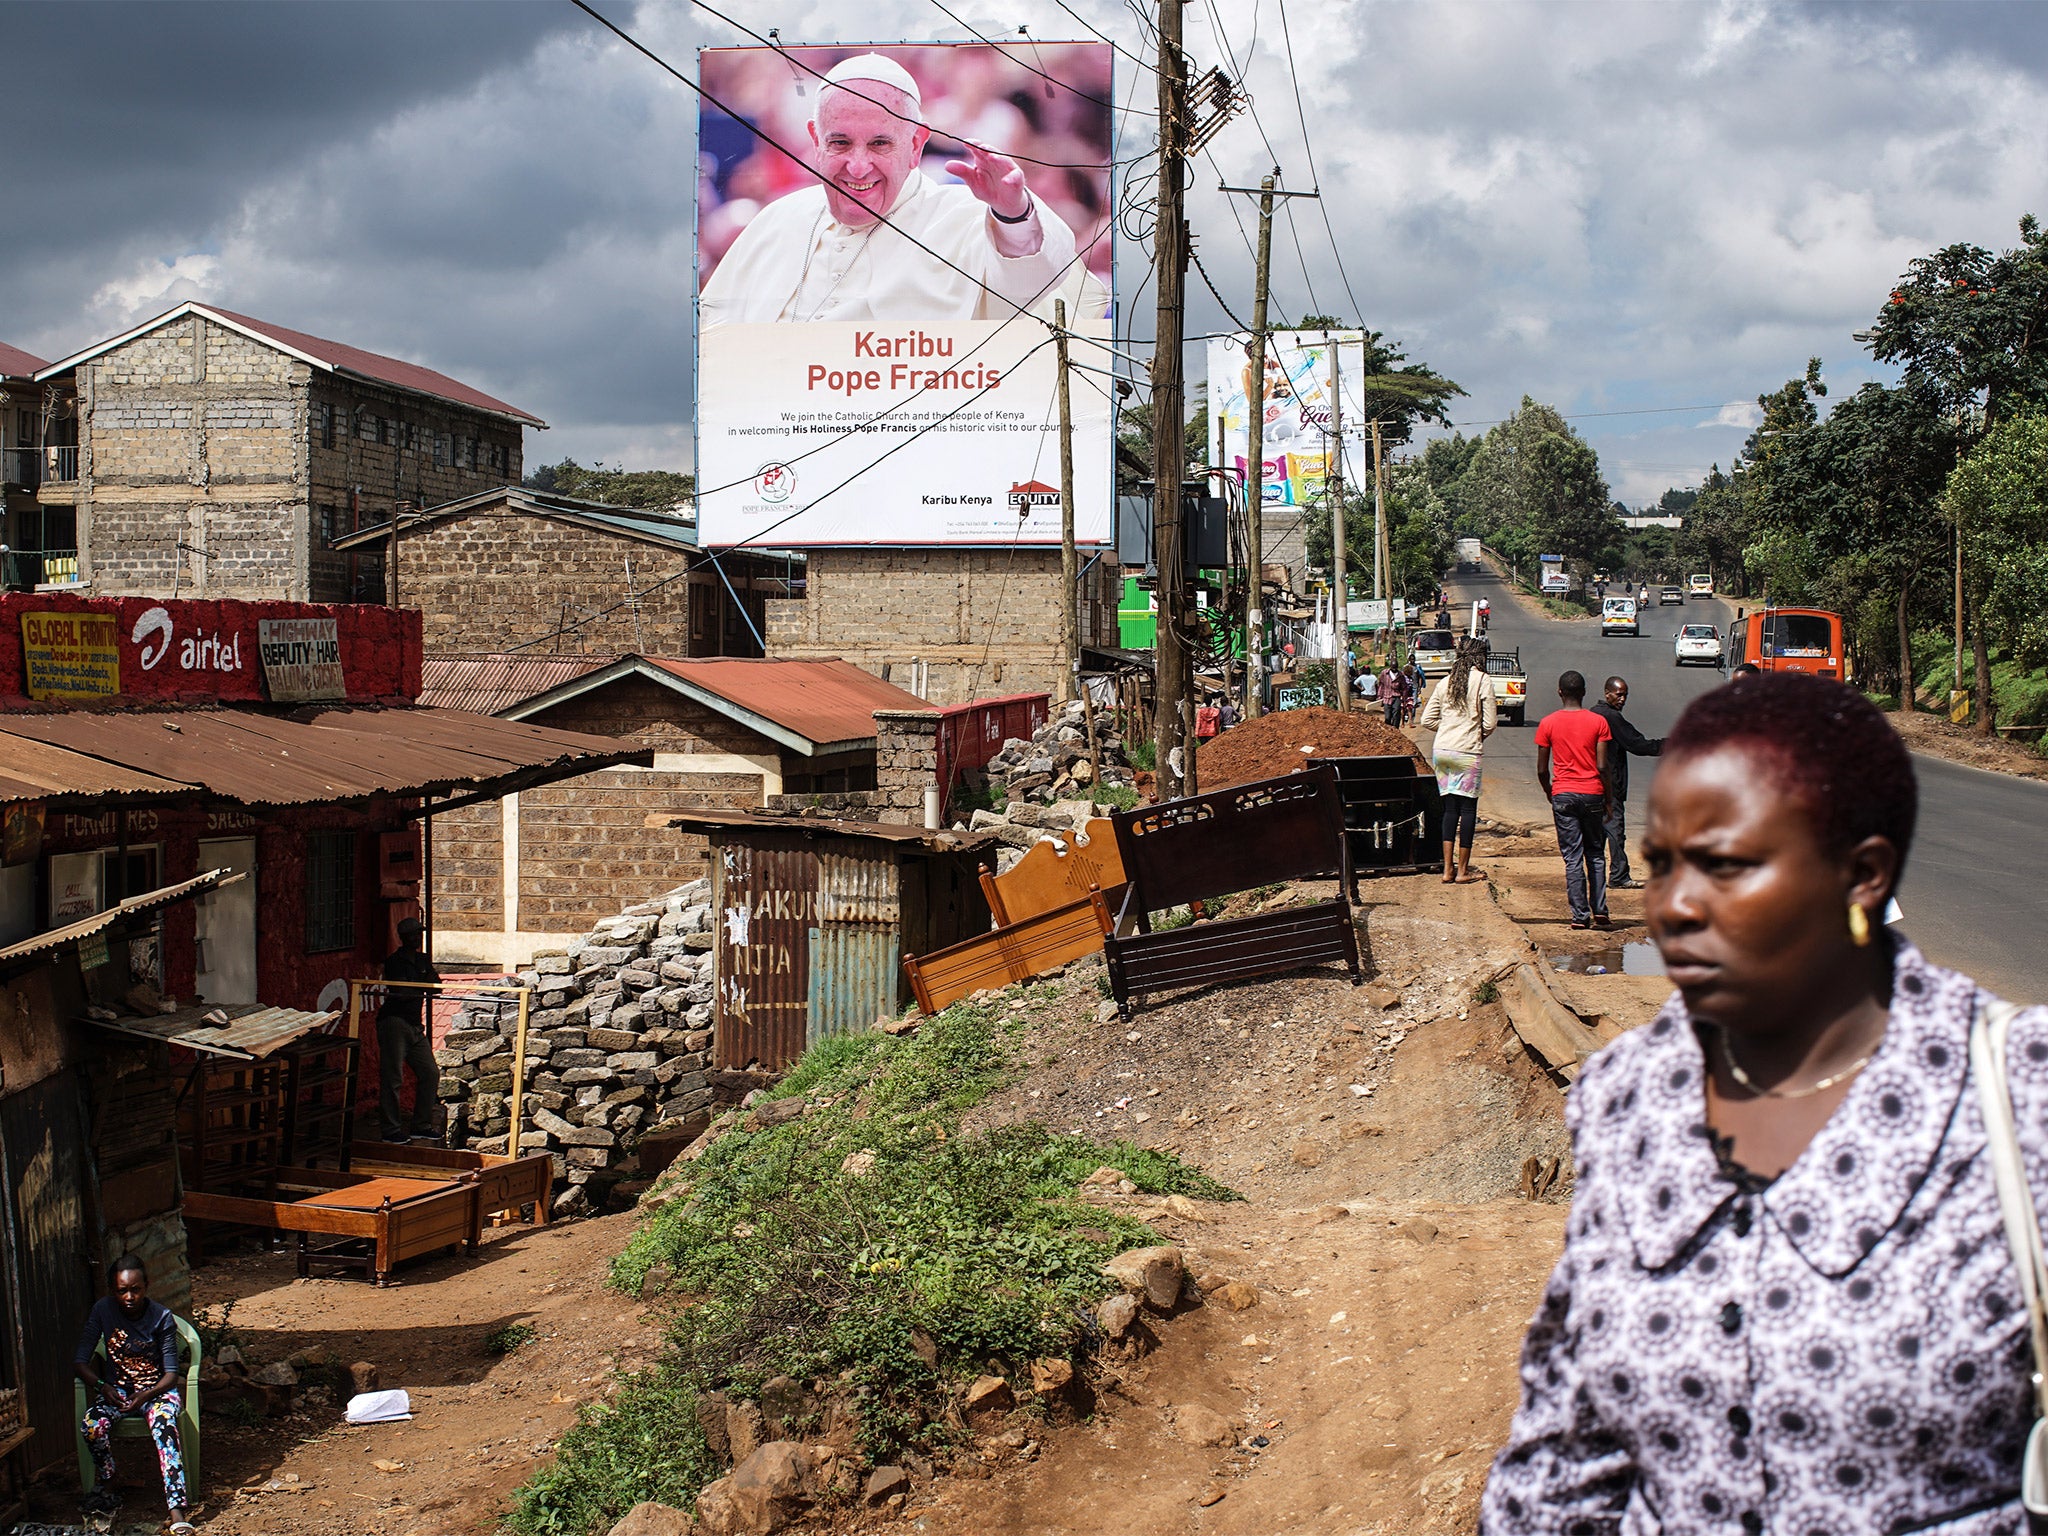 A poster in the Kangemi slum of Nairobi welcomes Pope Francis on his visit to Kenya. But campaigners want the pontiff to intervene over the unsolved killing of a Catholic missionary in 2000